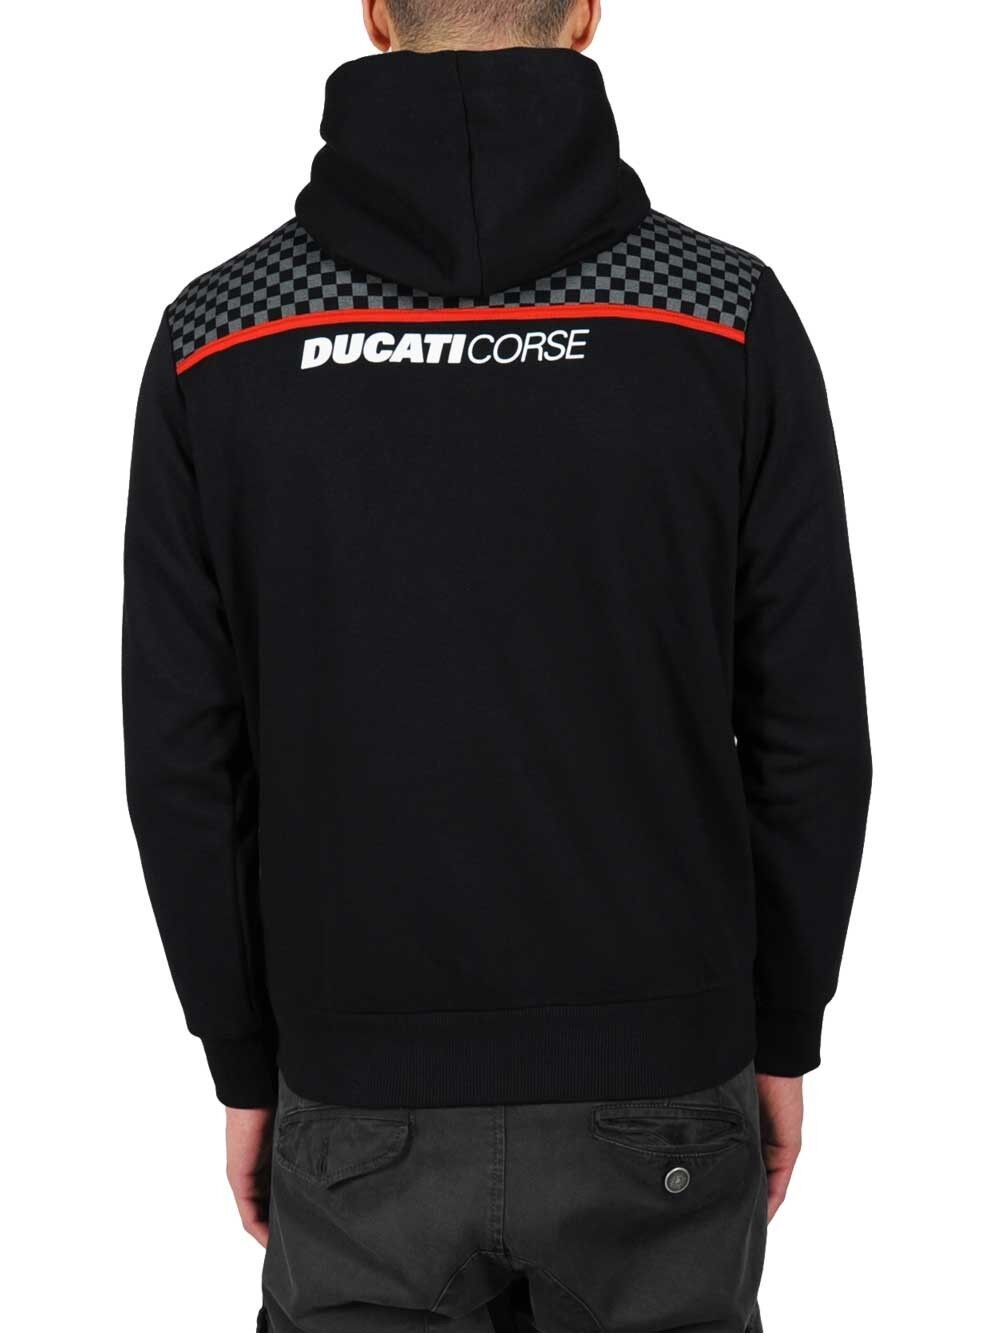 New Official Ducati Corse Black Zip Up Hoodie - 15 26001